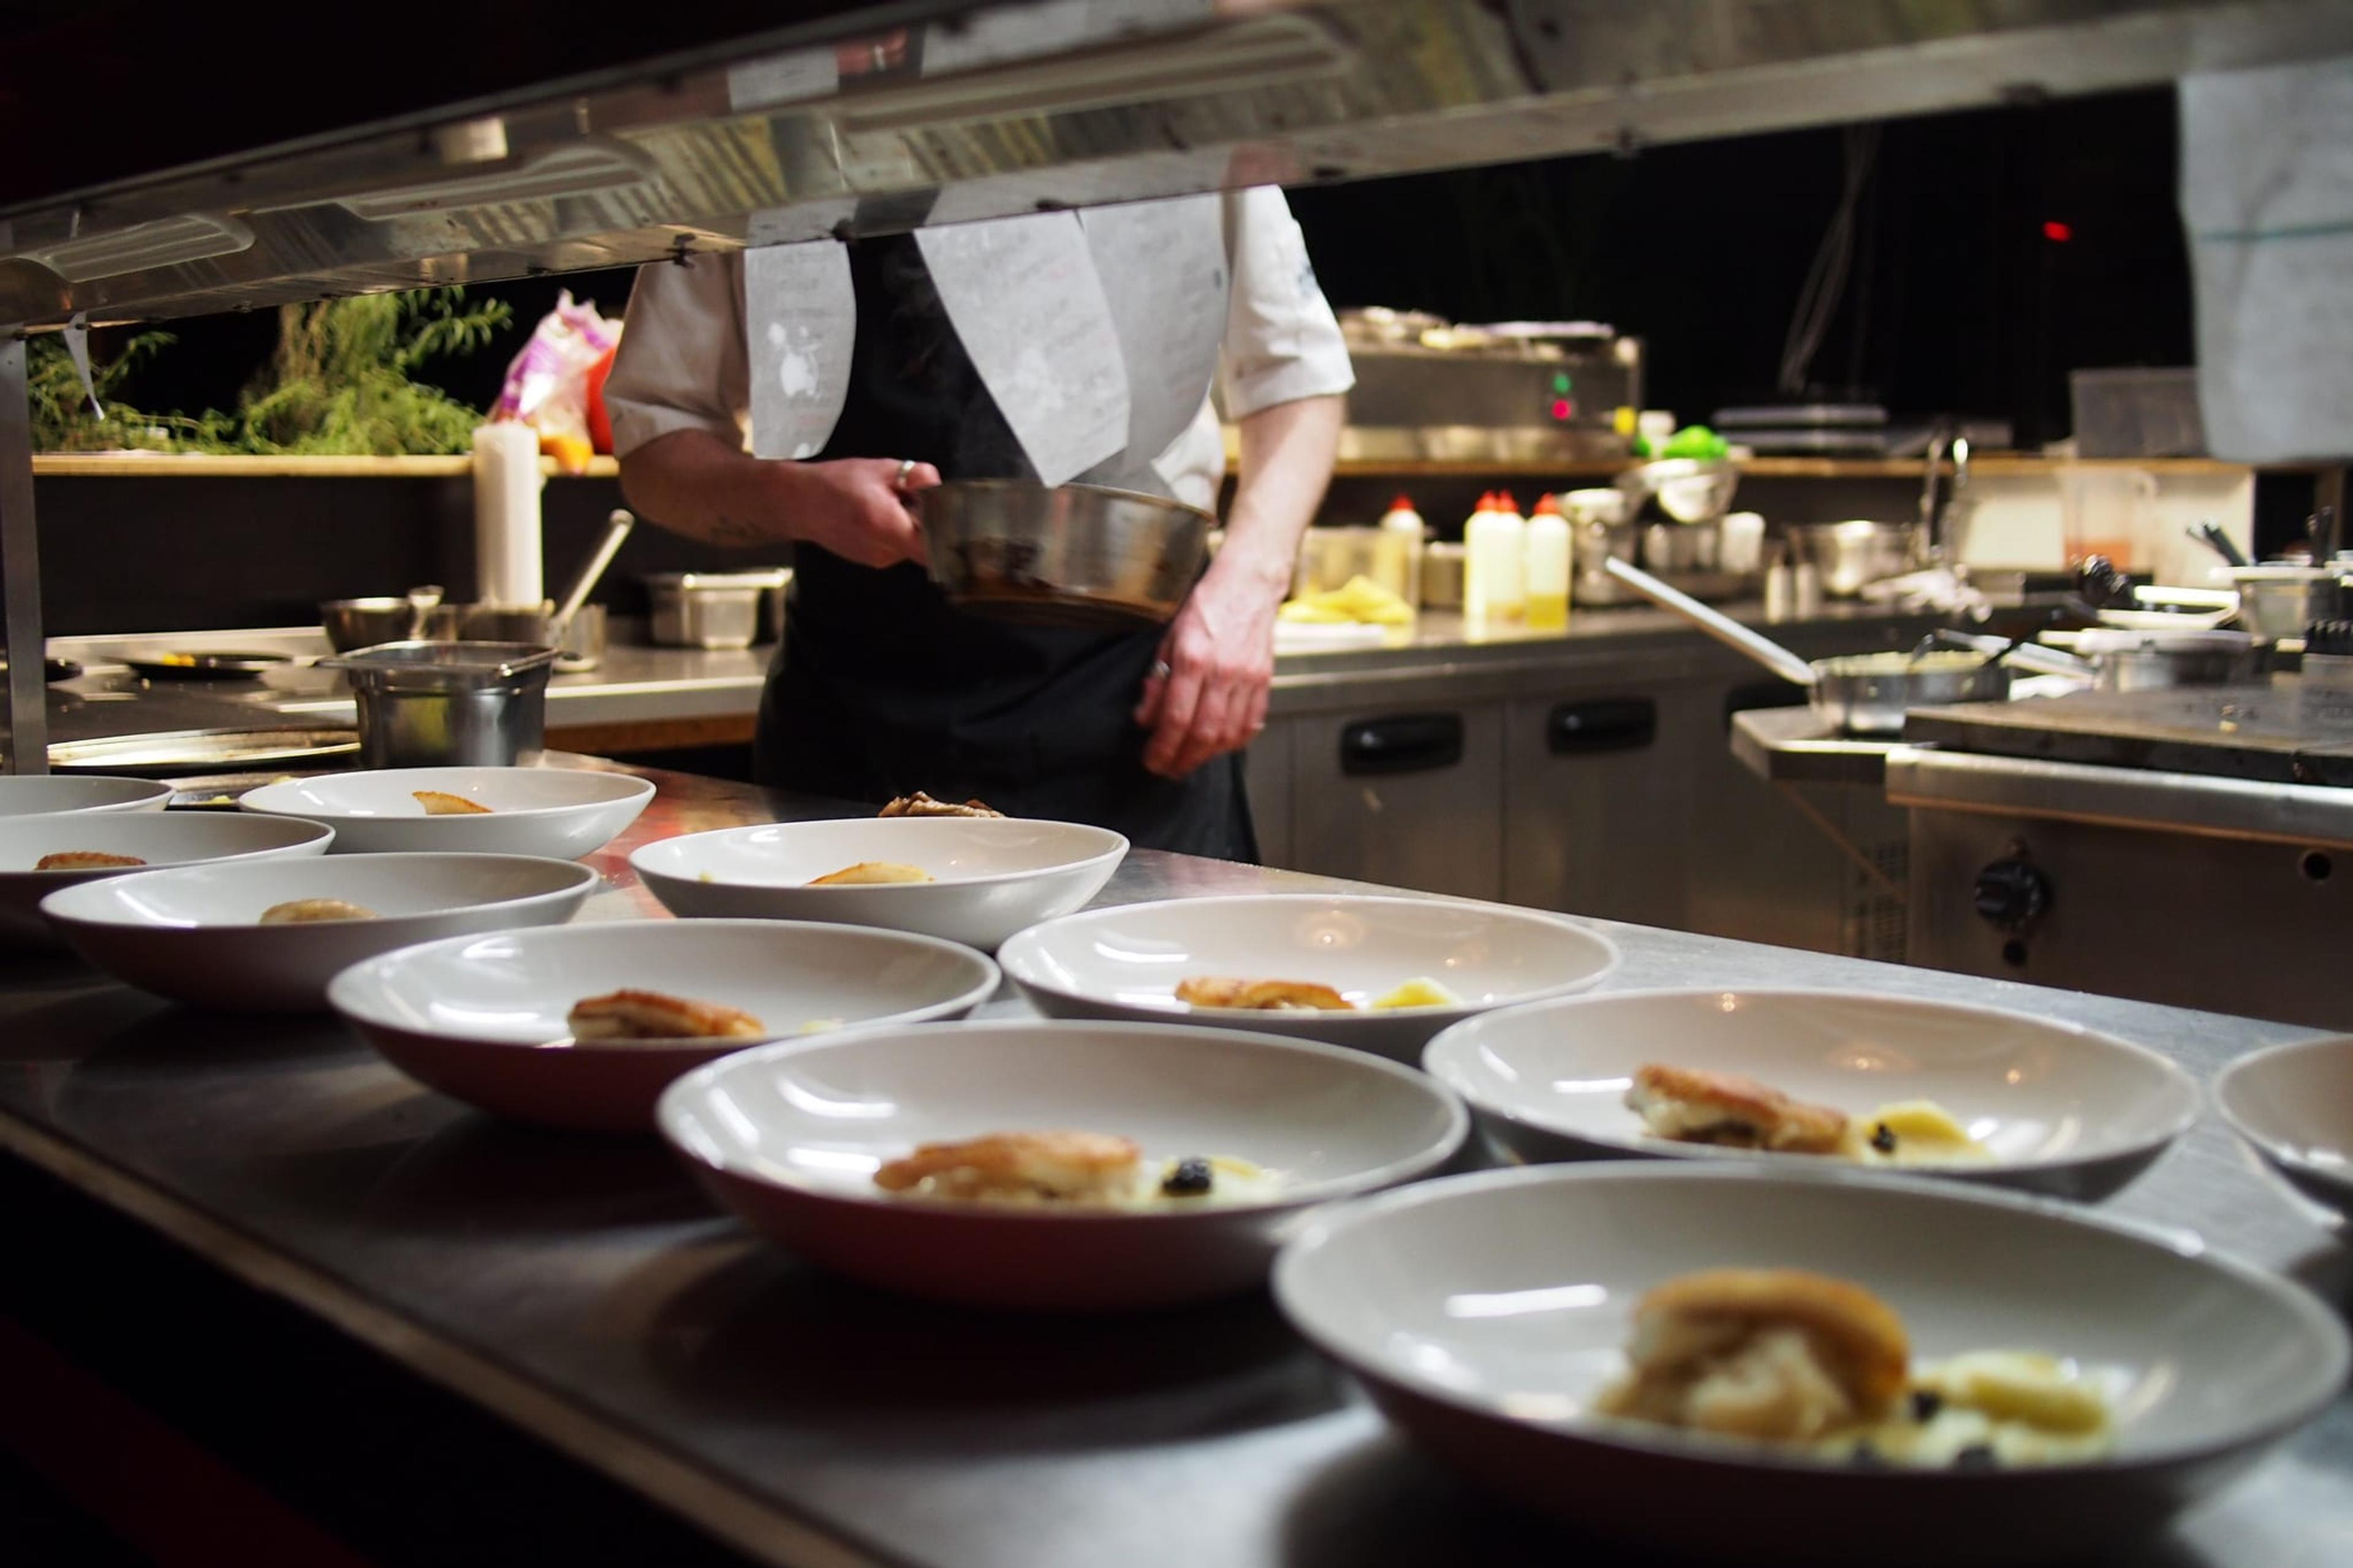 Photo of plated food in a restaurant kitchen, with chef in the background tossing food in a pan.